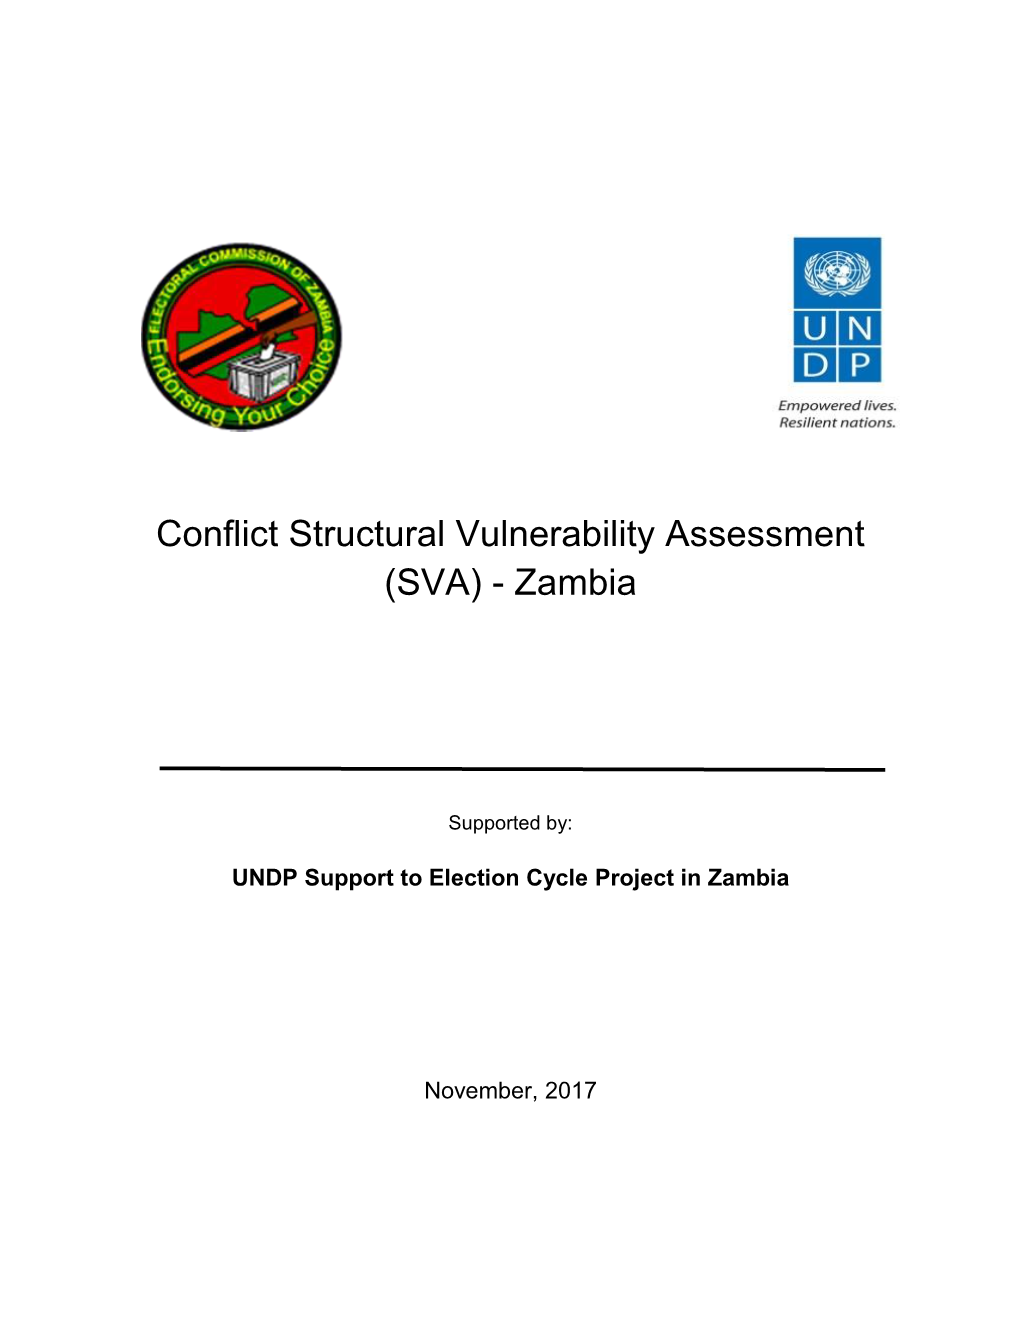 Conflict Structural Vulnerability Assessment (SVA) - Zambia